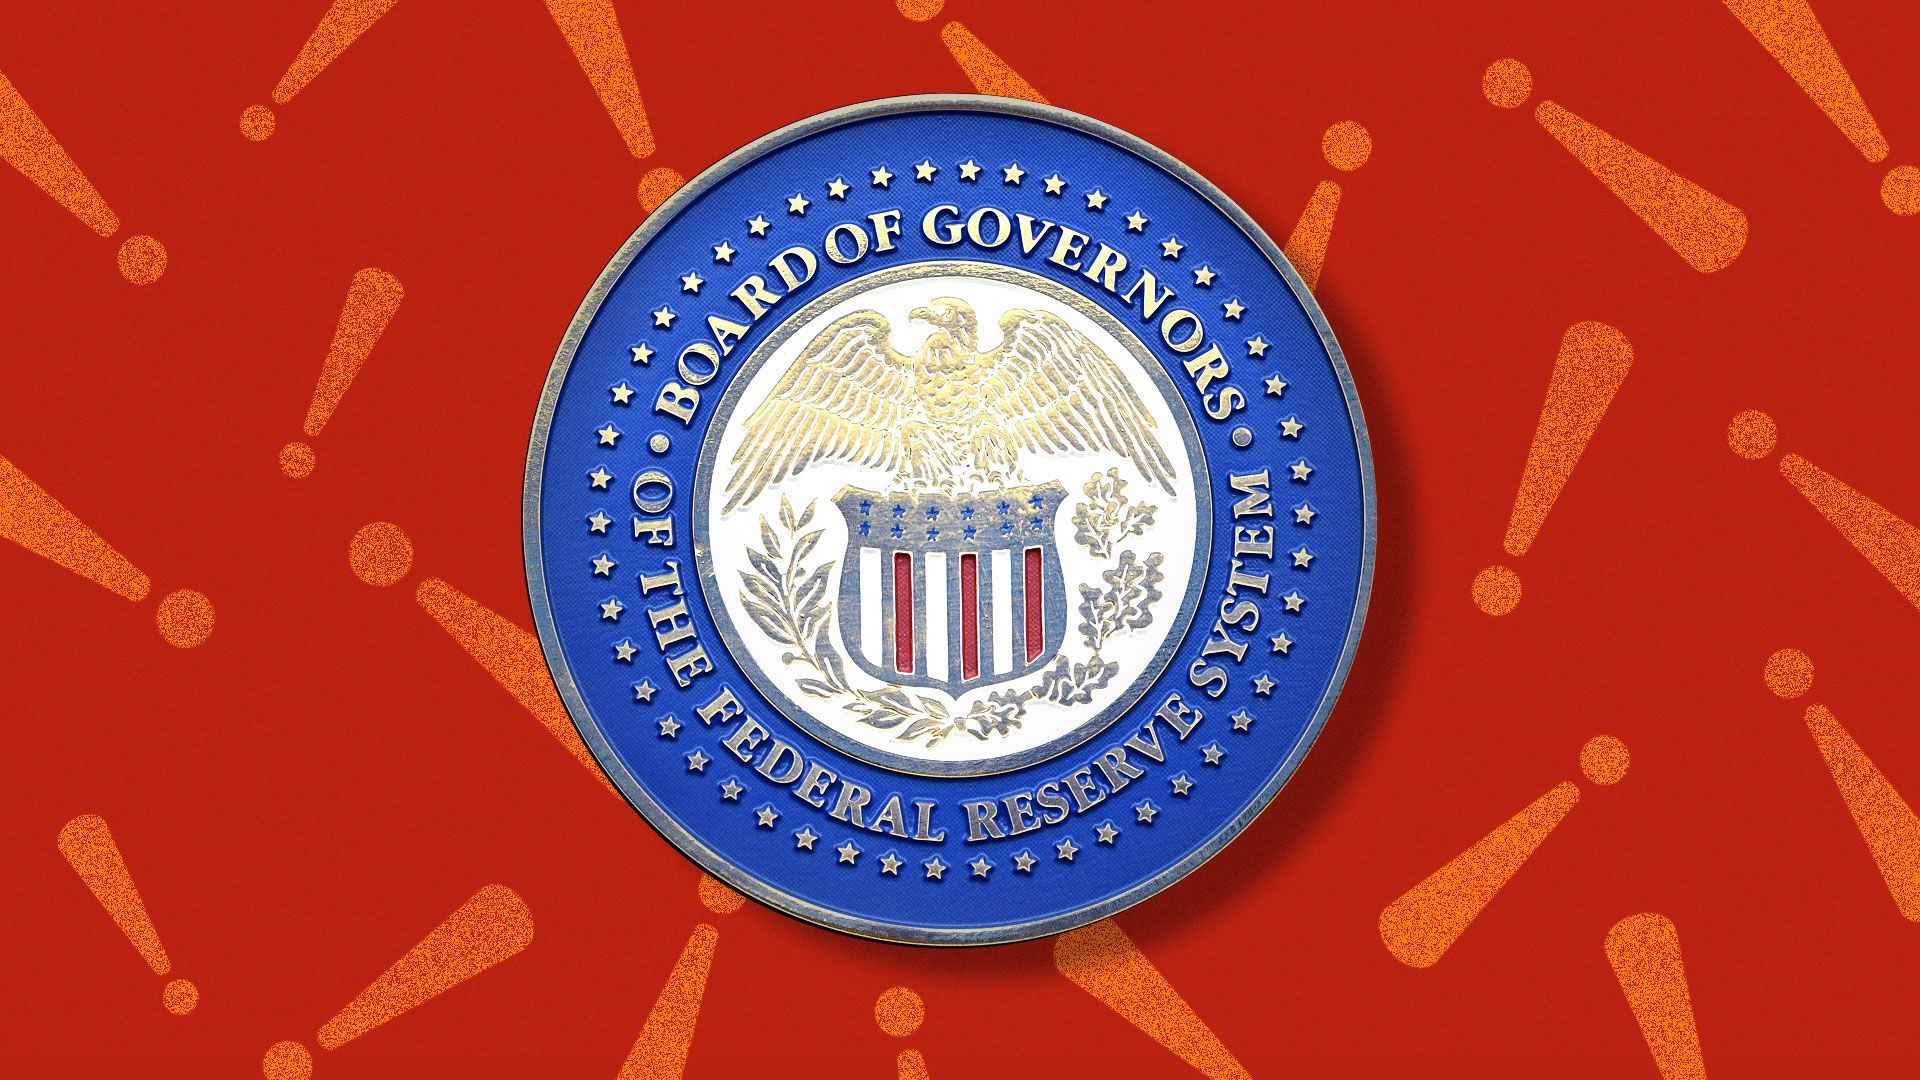 Illustration of The Federal Reserve seal on a background exclamation